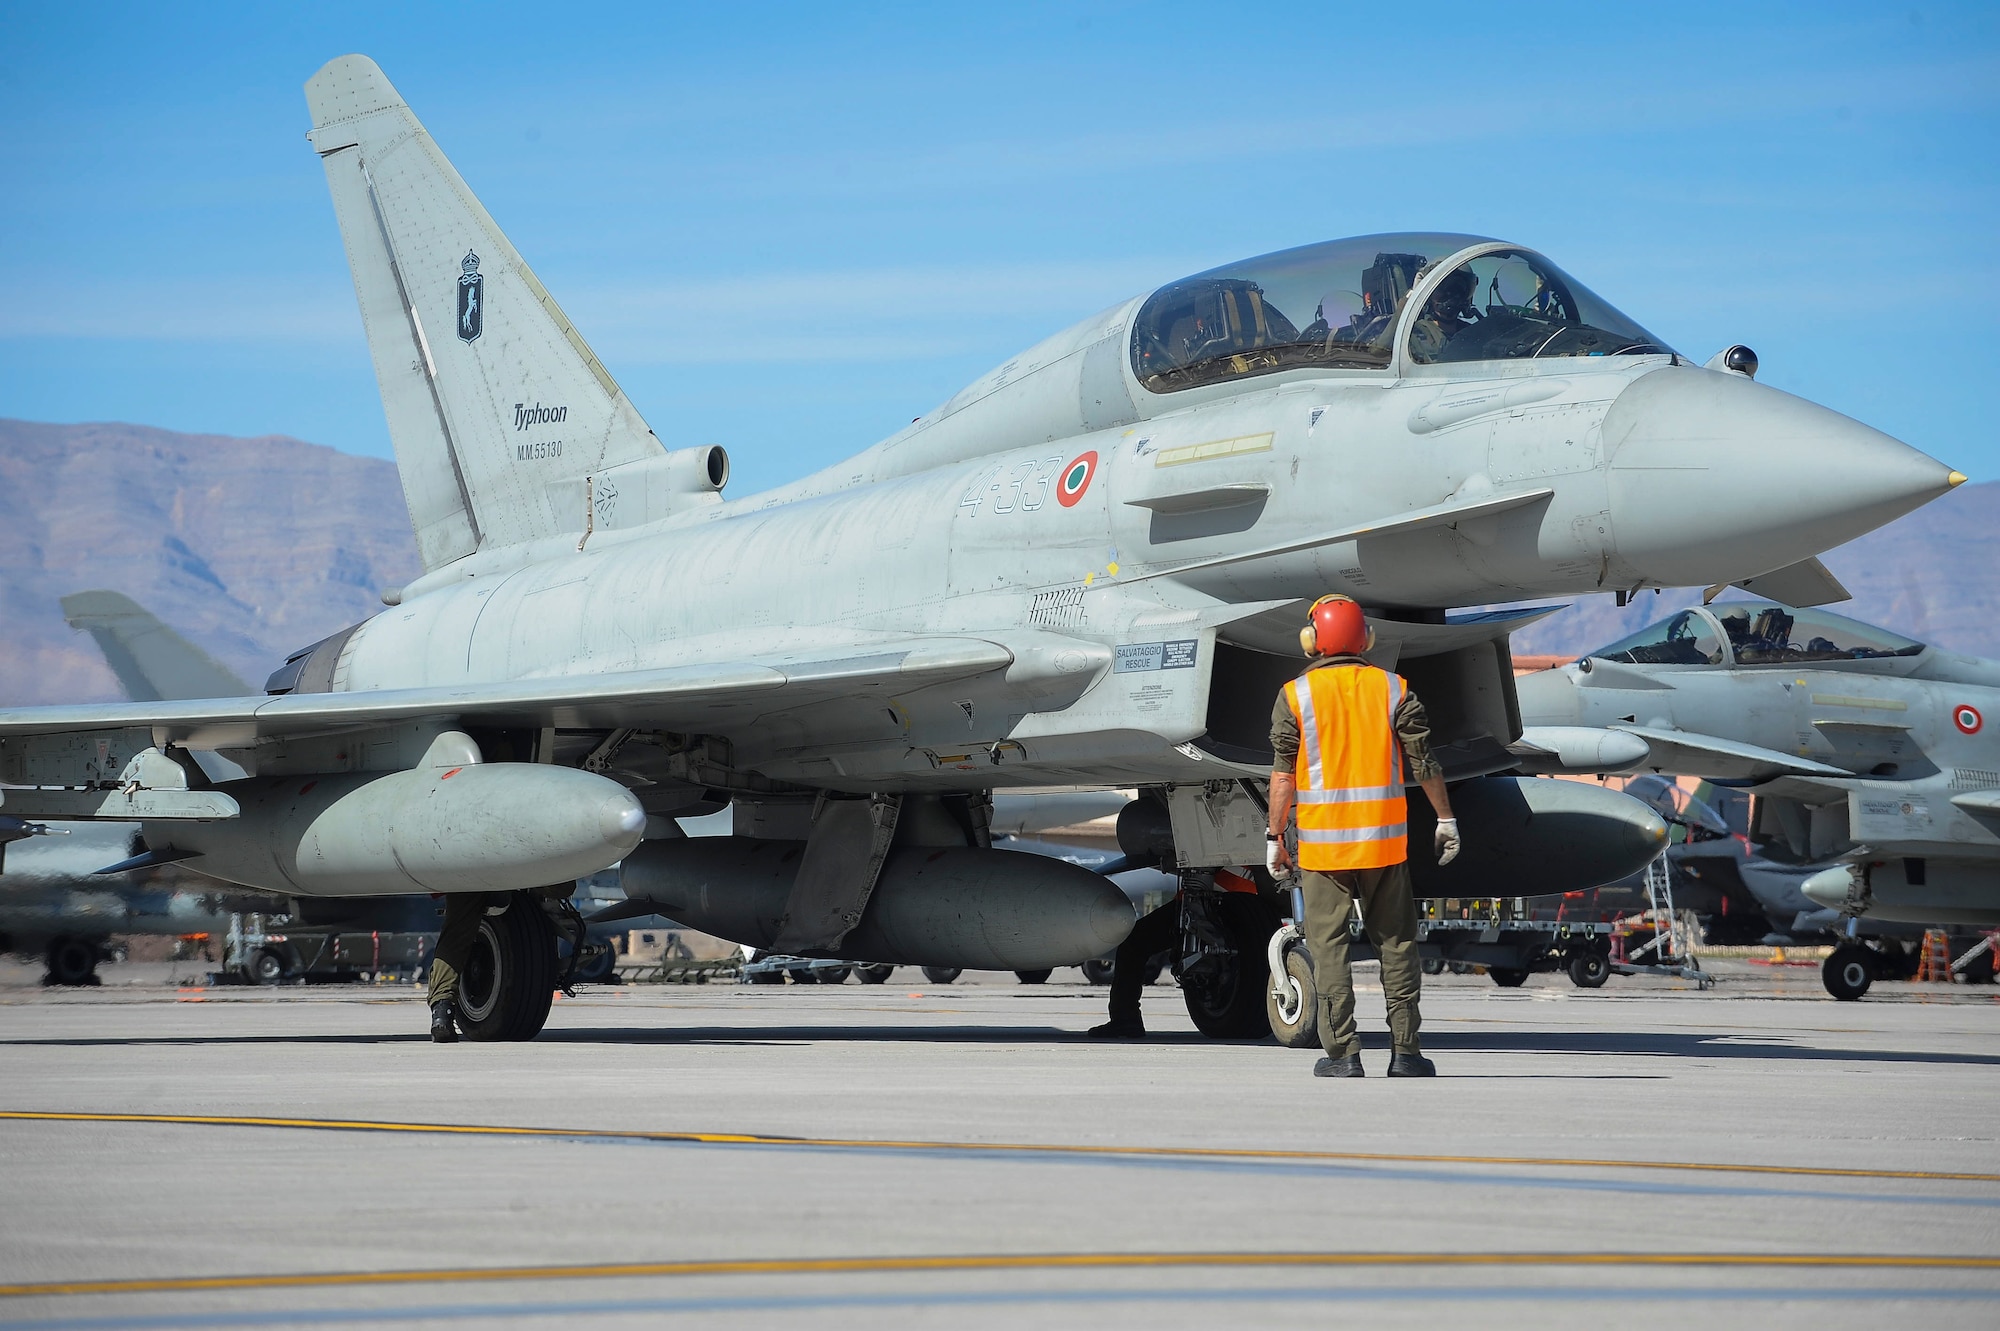 An Italian air force Eurofighter Typhoon from the 4th Fighter Wing, Grosseto, Italy, conducts pre-flight checks in preparation for take-off during Red Flag 16-2 March 3, 2016 at Nellis Air Force Base, Nev., for Red Flag 16-2. It is the first time the Eurofighter Typhoon from the Italian air force is participating. (U.S. Air Force photo by Senior Airman Jake Carter)